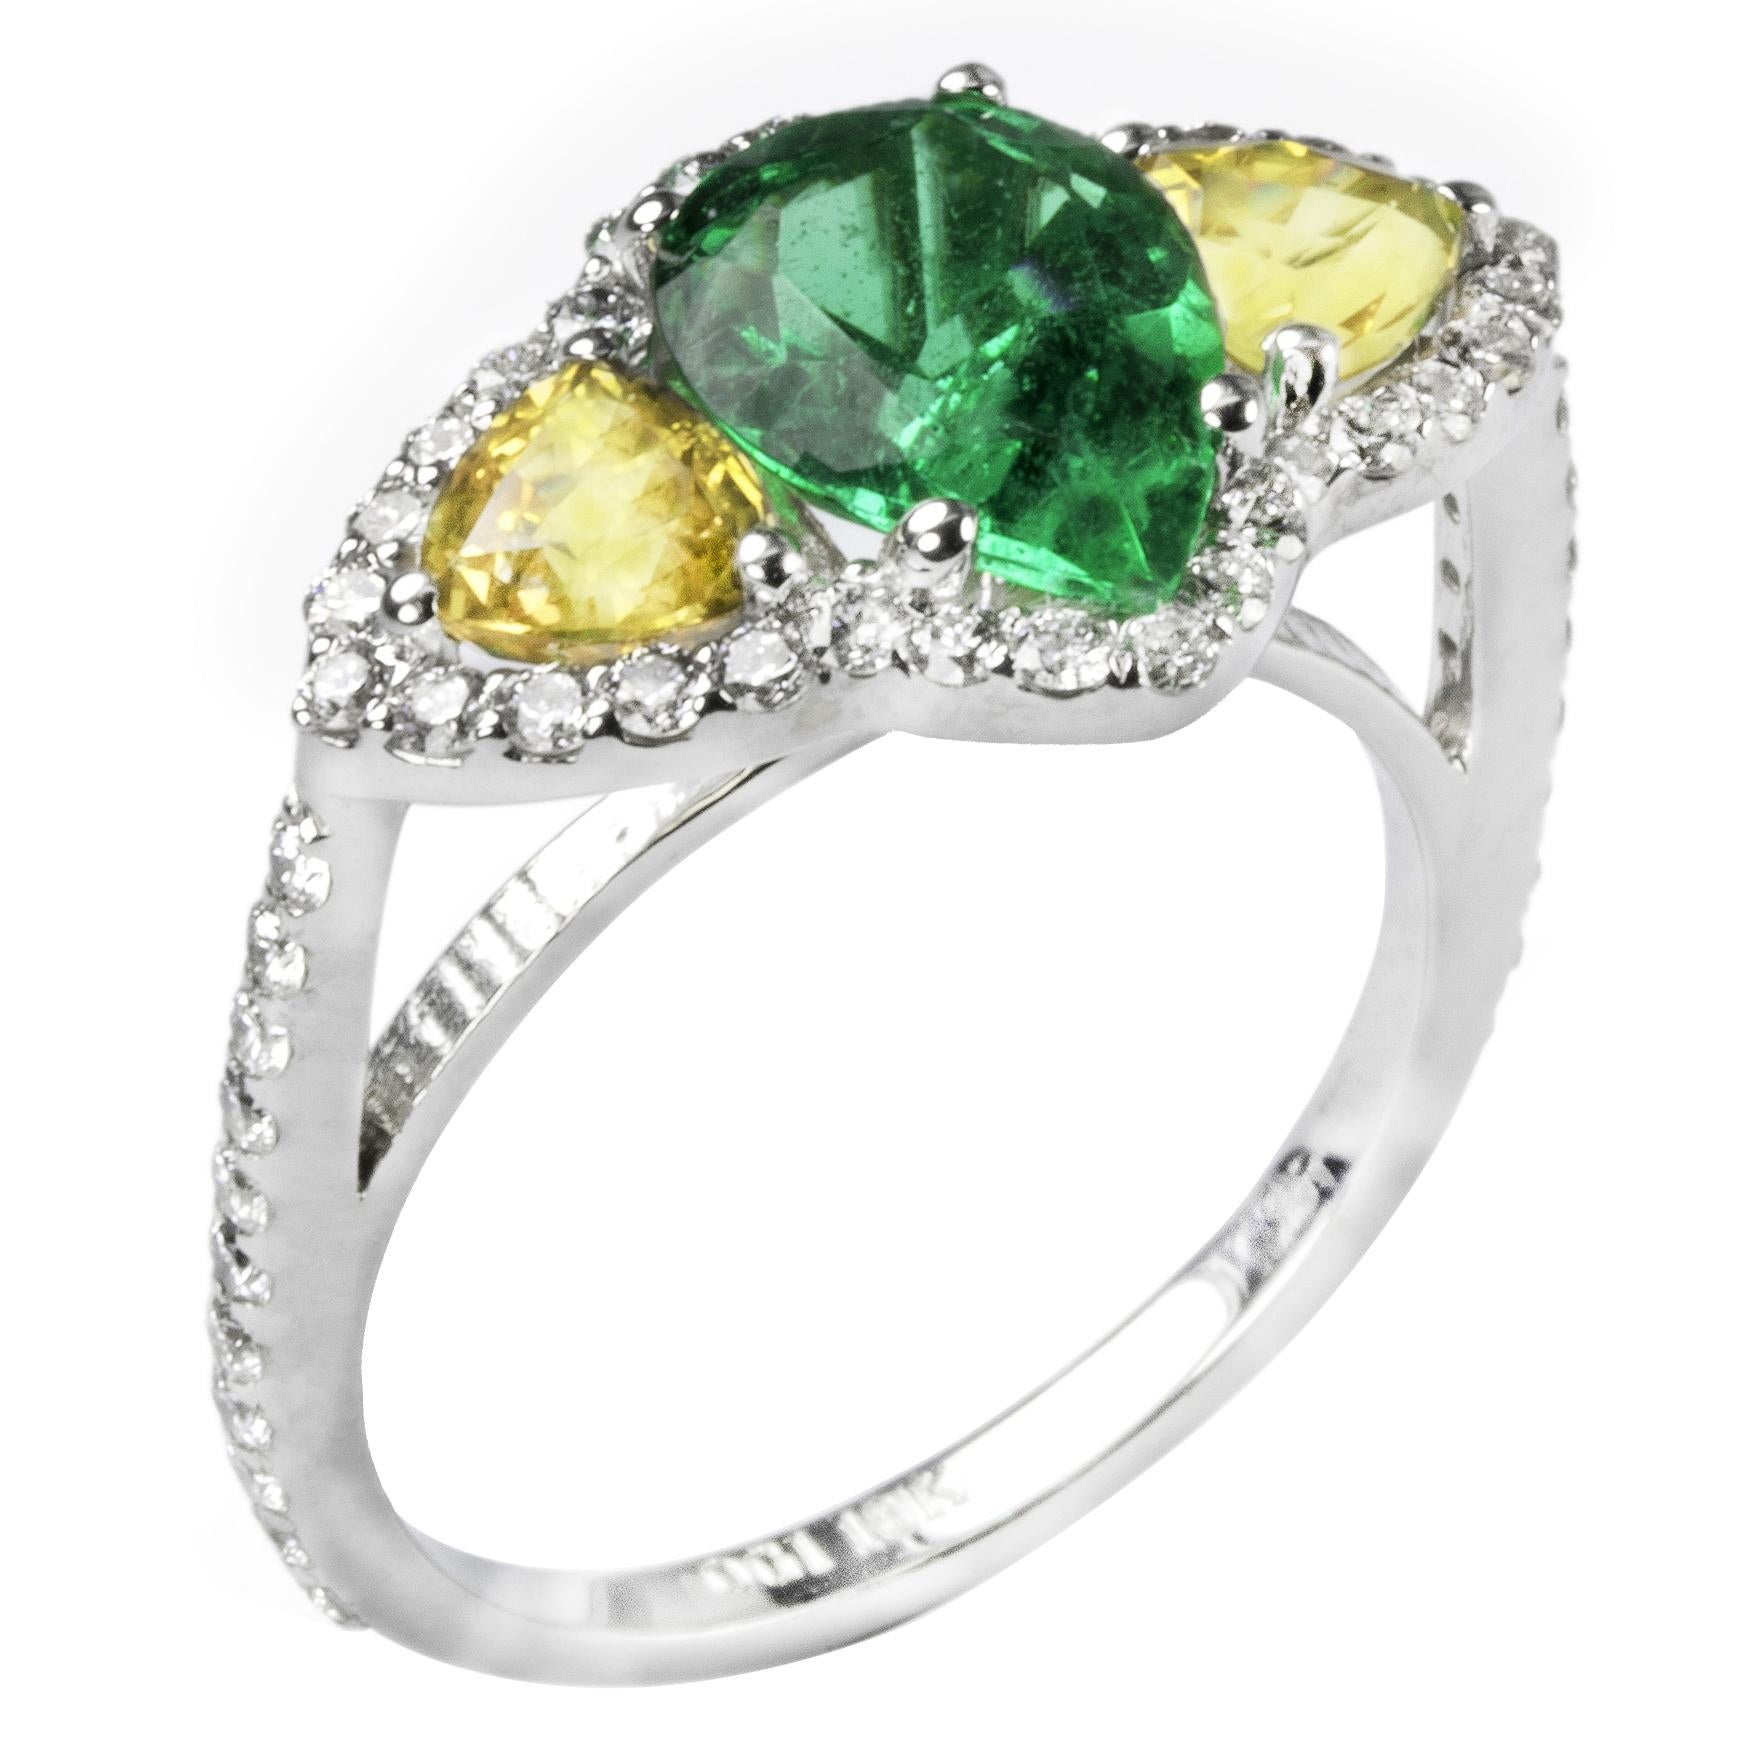 18 karat white gold one of a kind cocktail ring 
Pear shape Colombian emerald weighing 1.50
Two matched triangle yellow sapphires side stones weighing 1.21 carat 
Surrounded by pave-set diamonds weighing 0.65 carats  
Diamond quality G VS
New